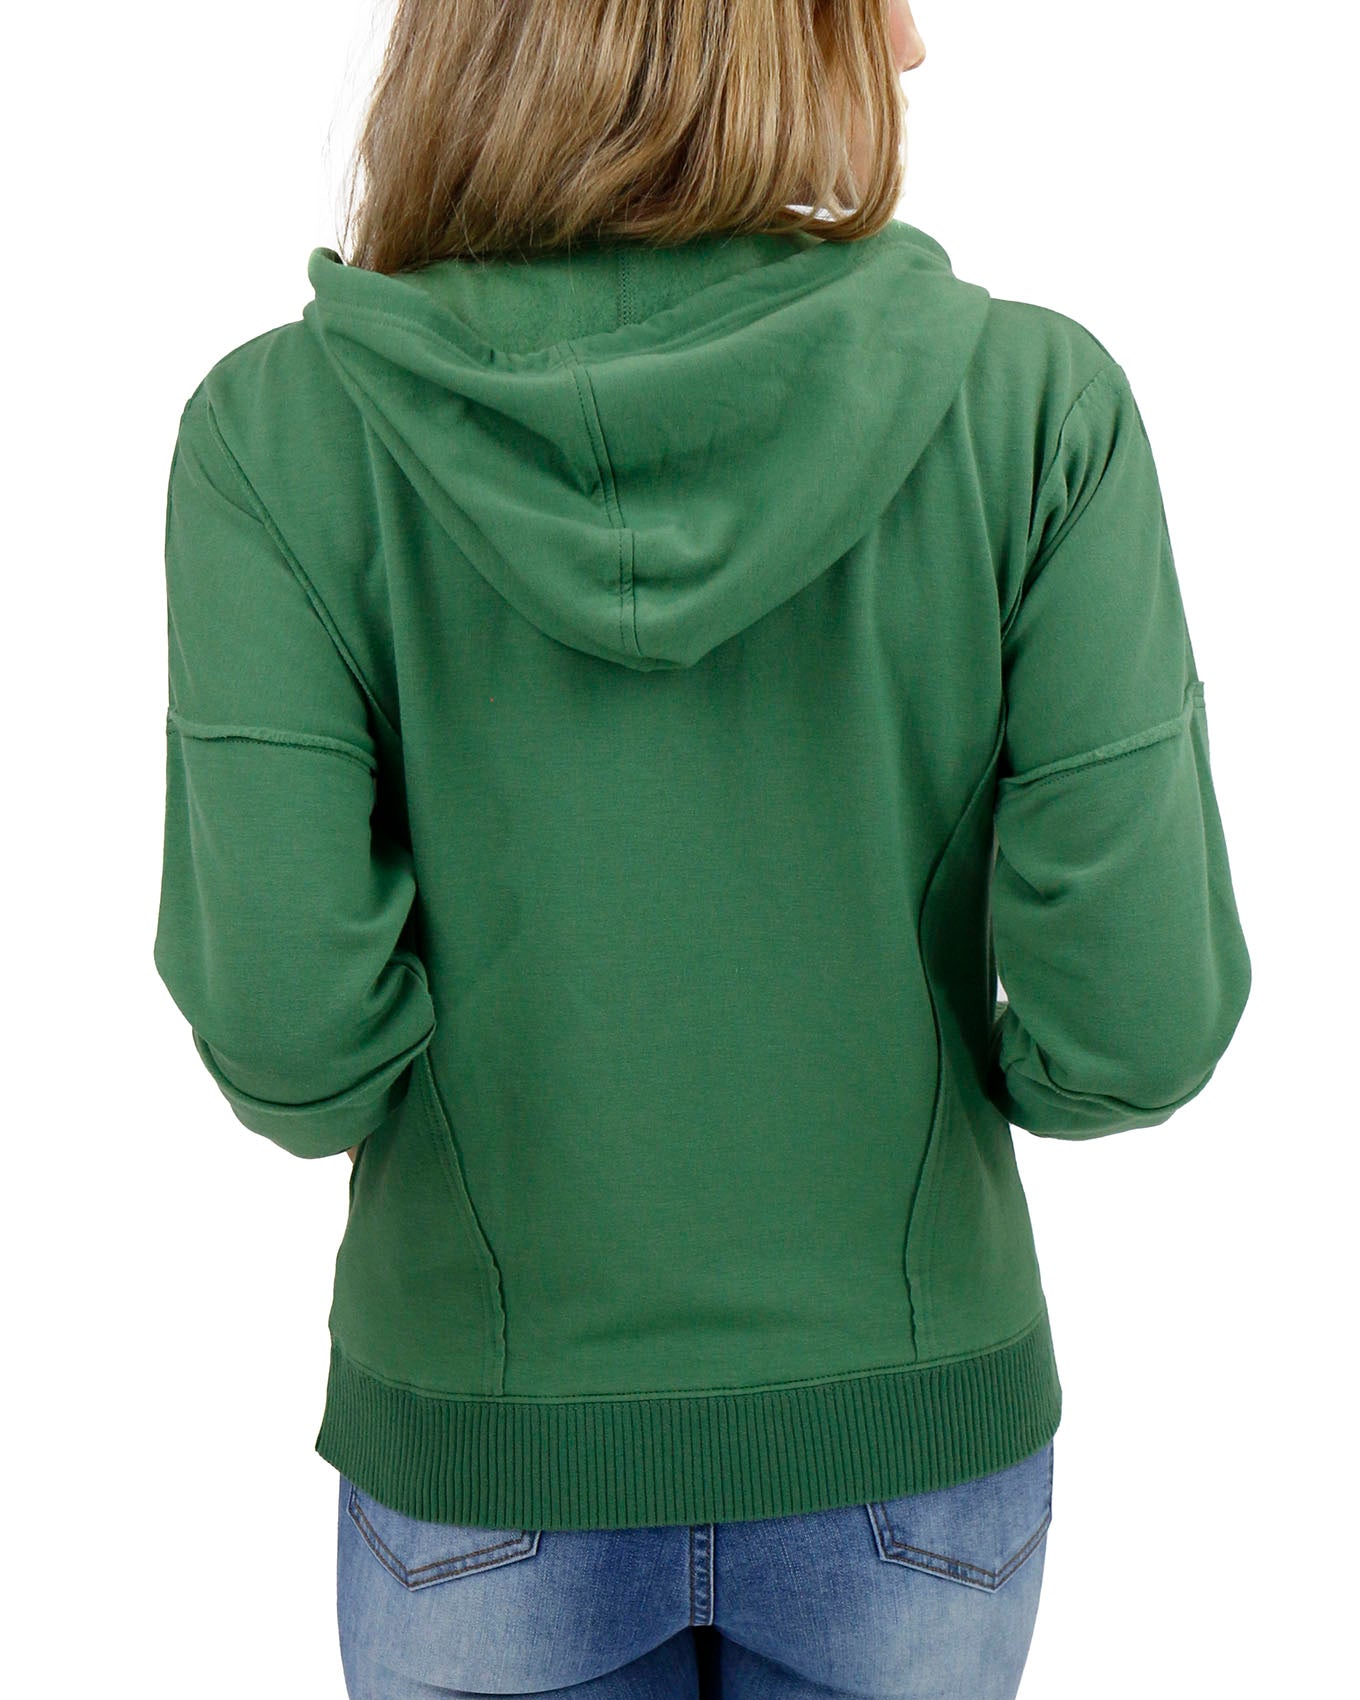 Signature Soft Hedge Green Zip Up Hoodie - FINAL SALE - Grace and Lace